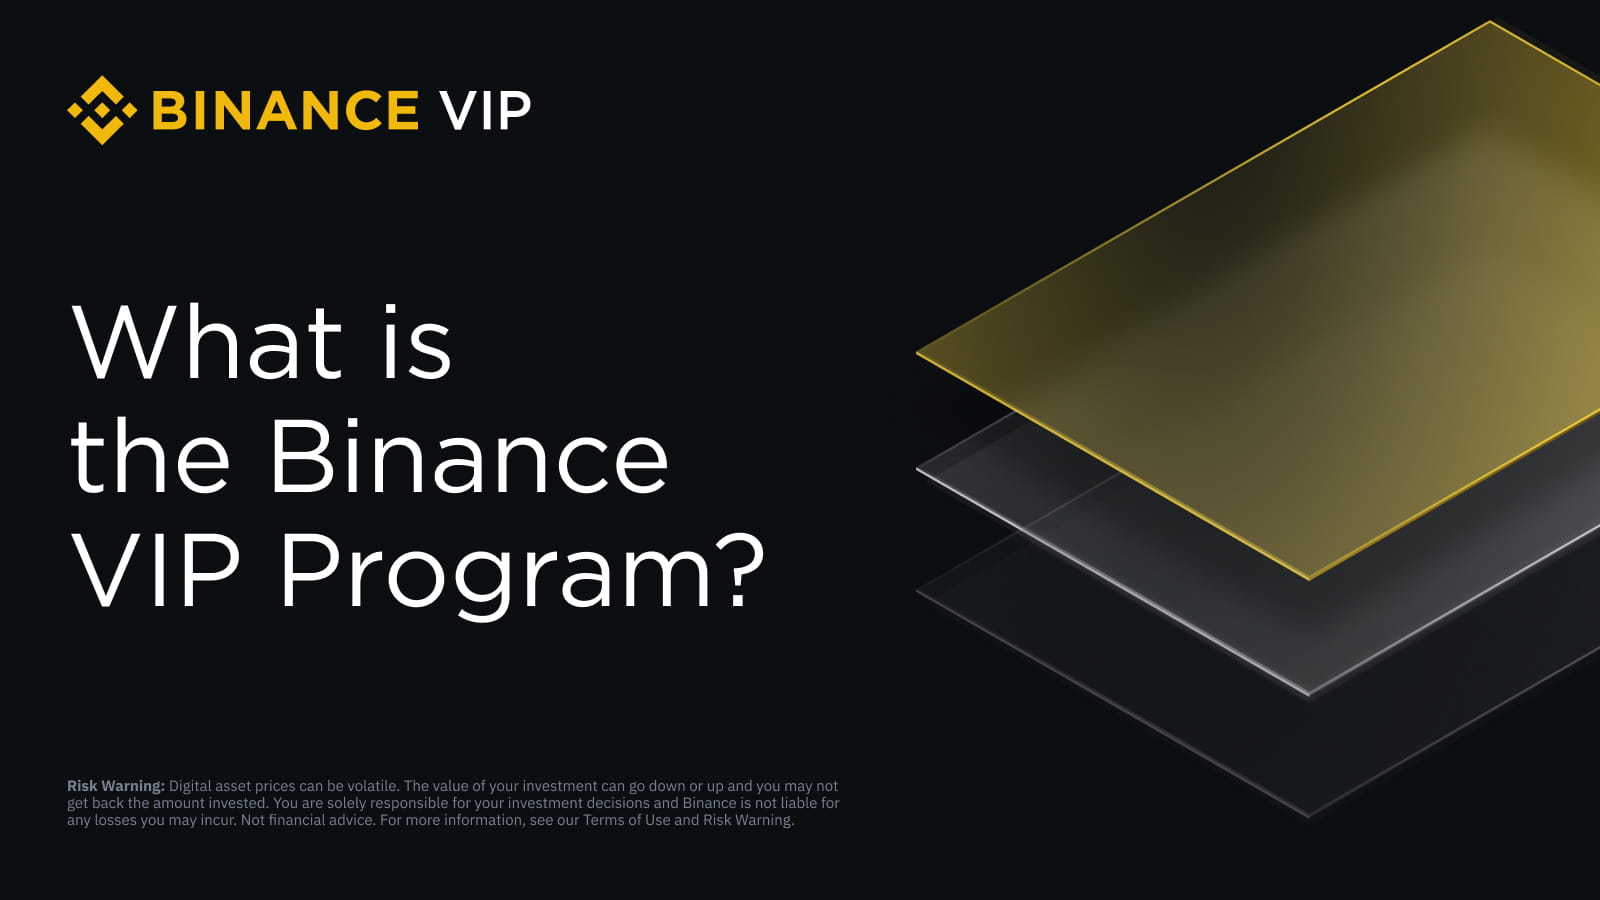 Binance Launches New VIP Program to Lure Traditional Traders - The Cryptocurrency Post